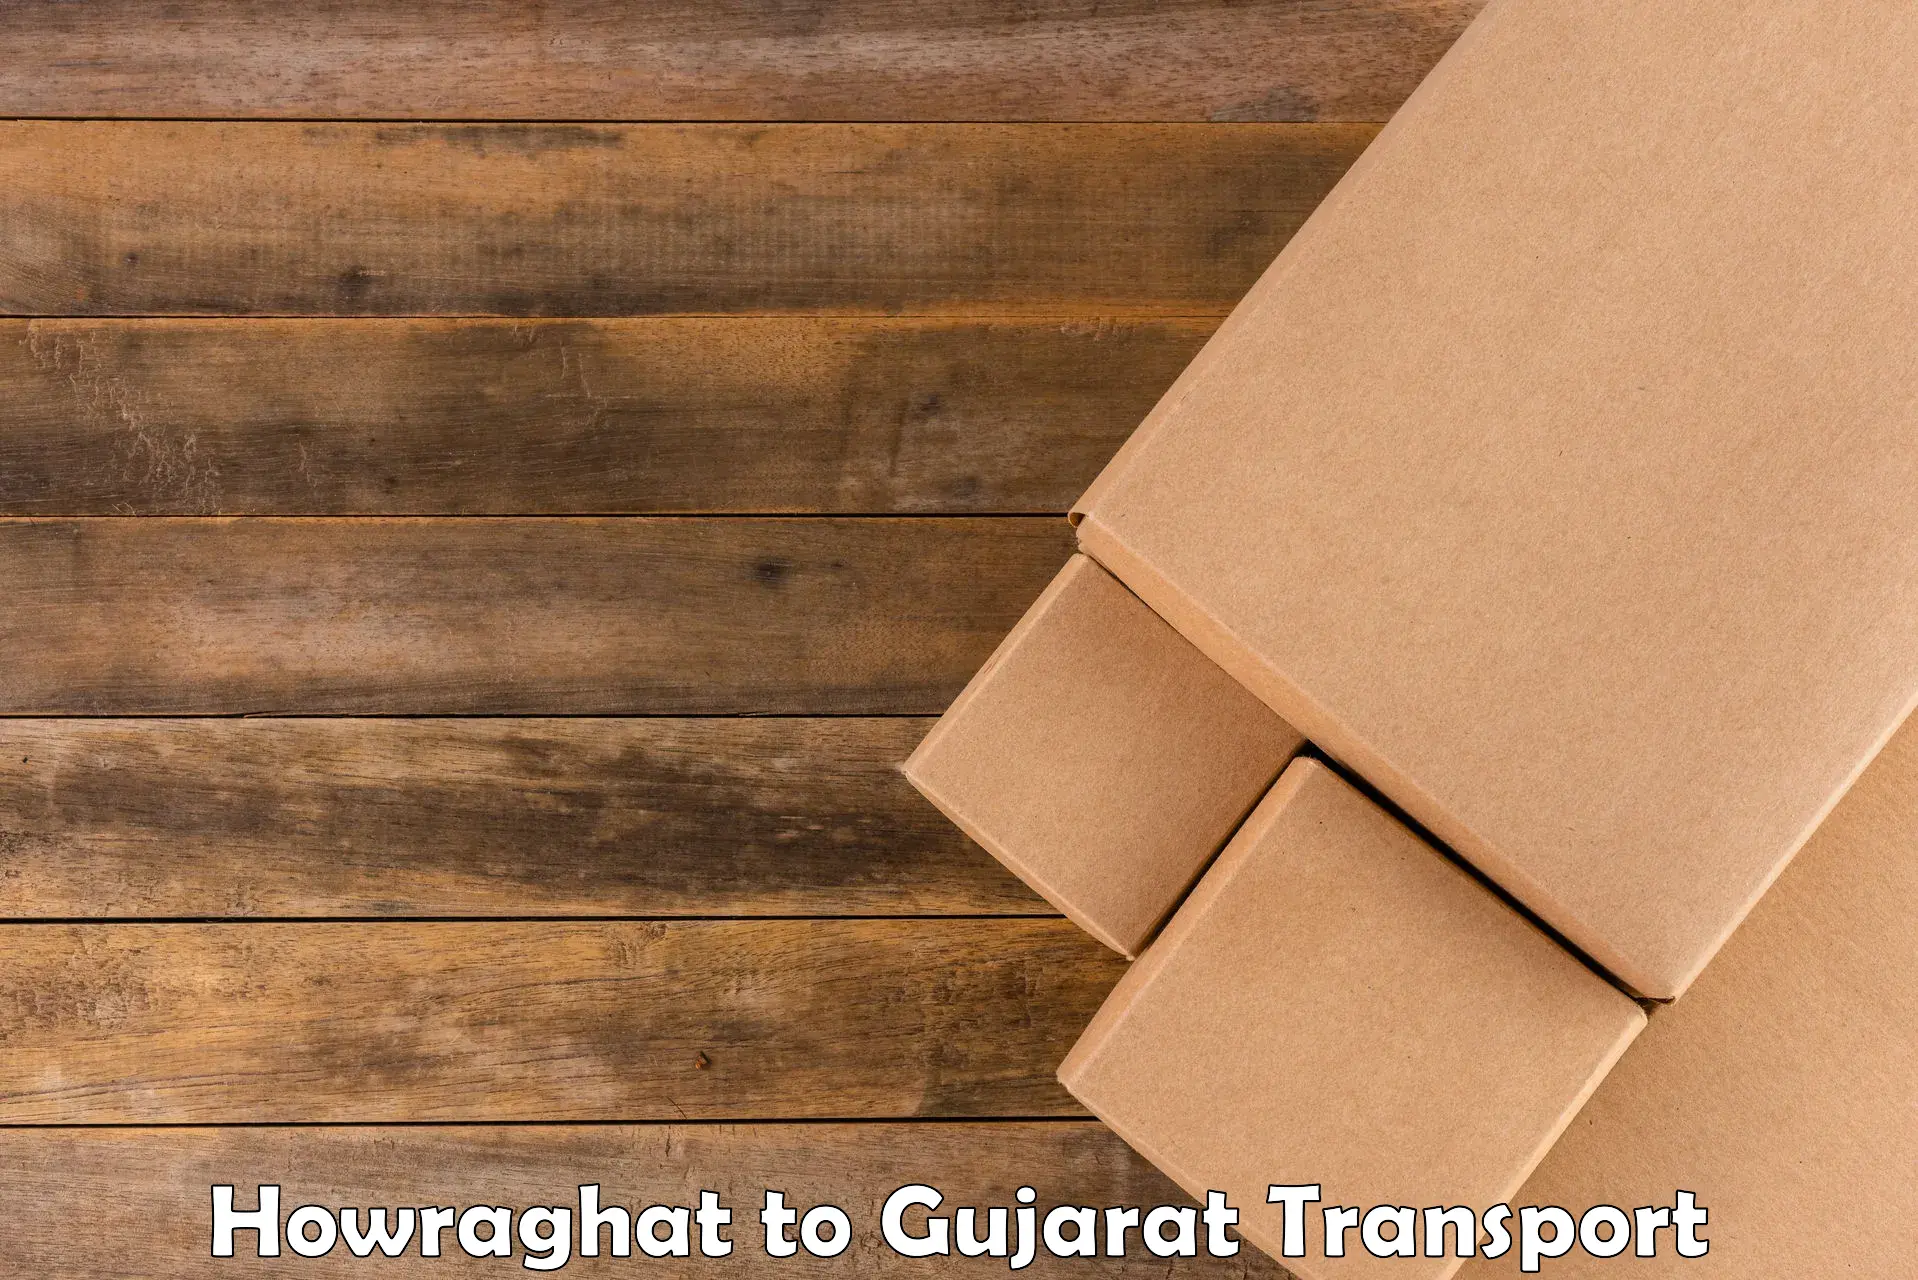 Lorry transport service Howraghat to Gujarat